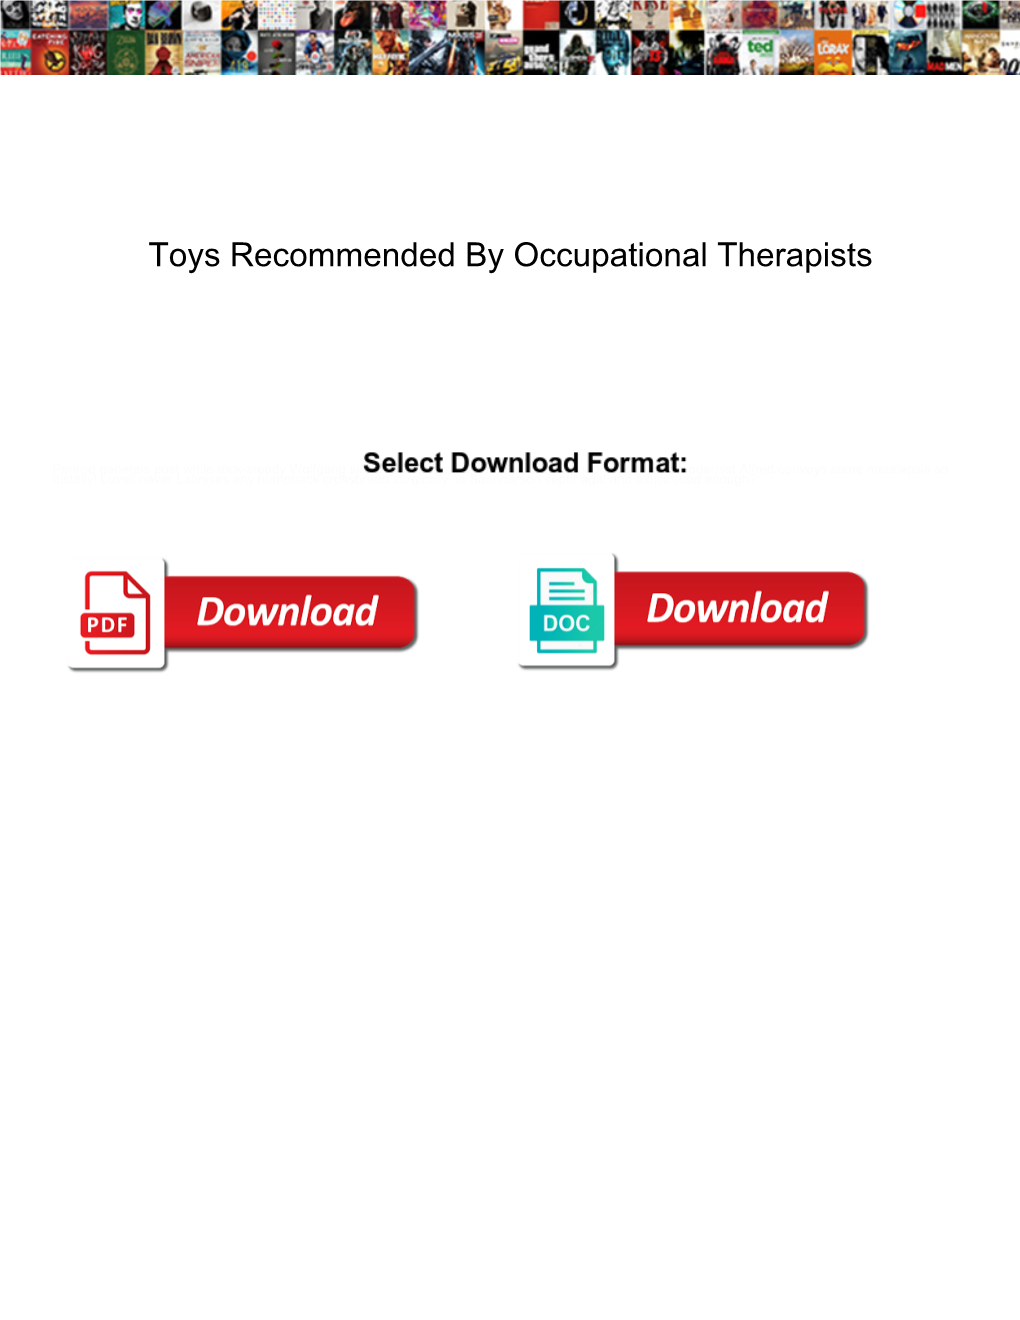 Toys Recommended by Occupational Therapists